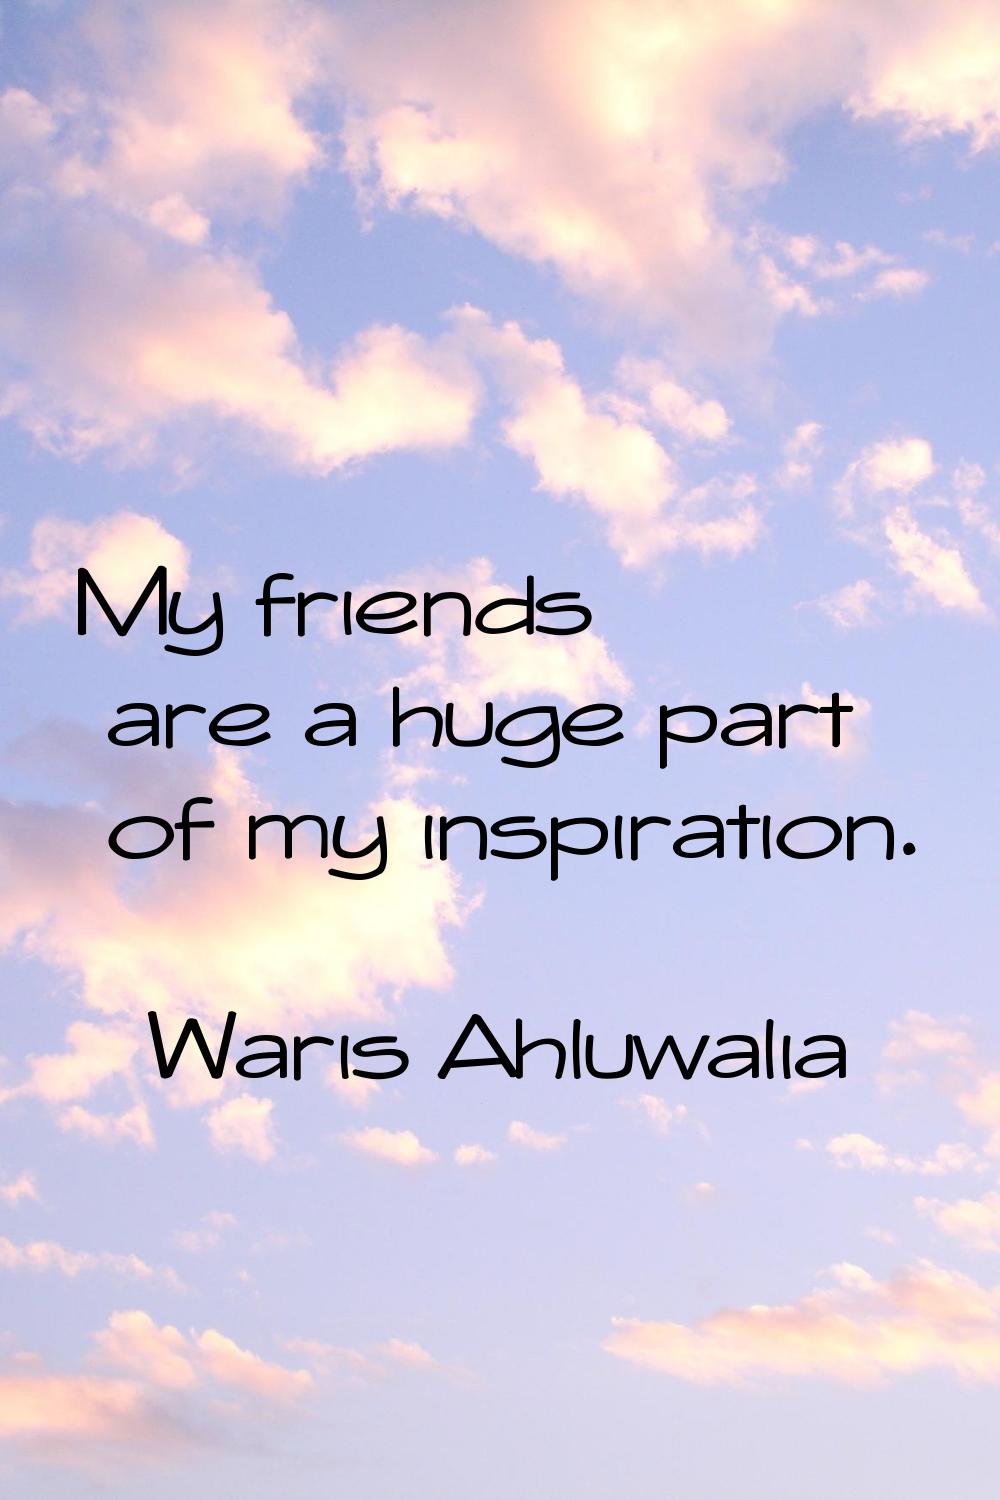 My friends are a huge part of my inspiration.